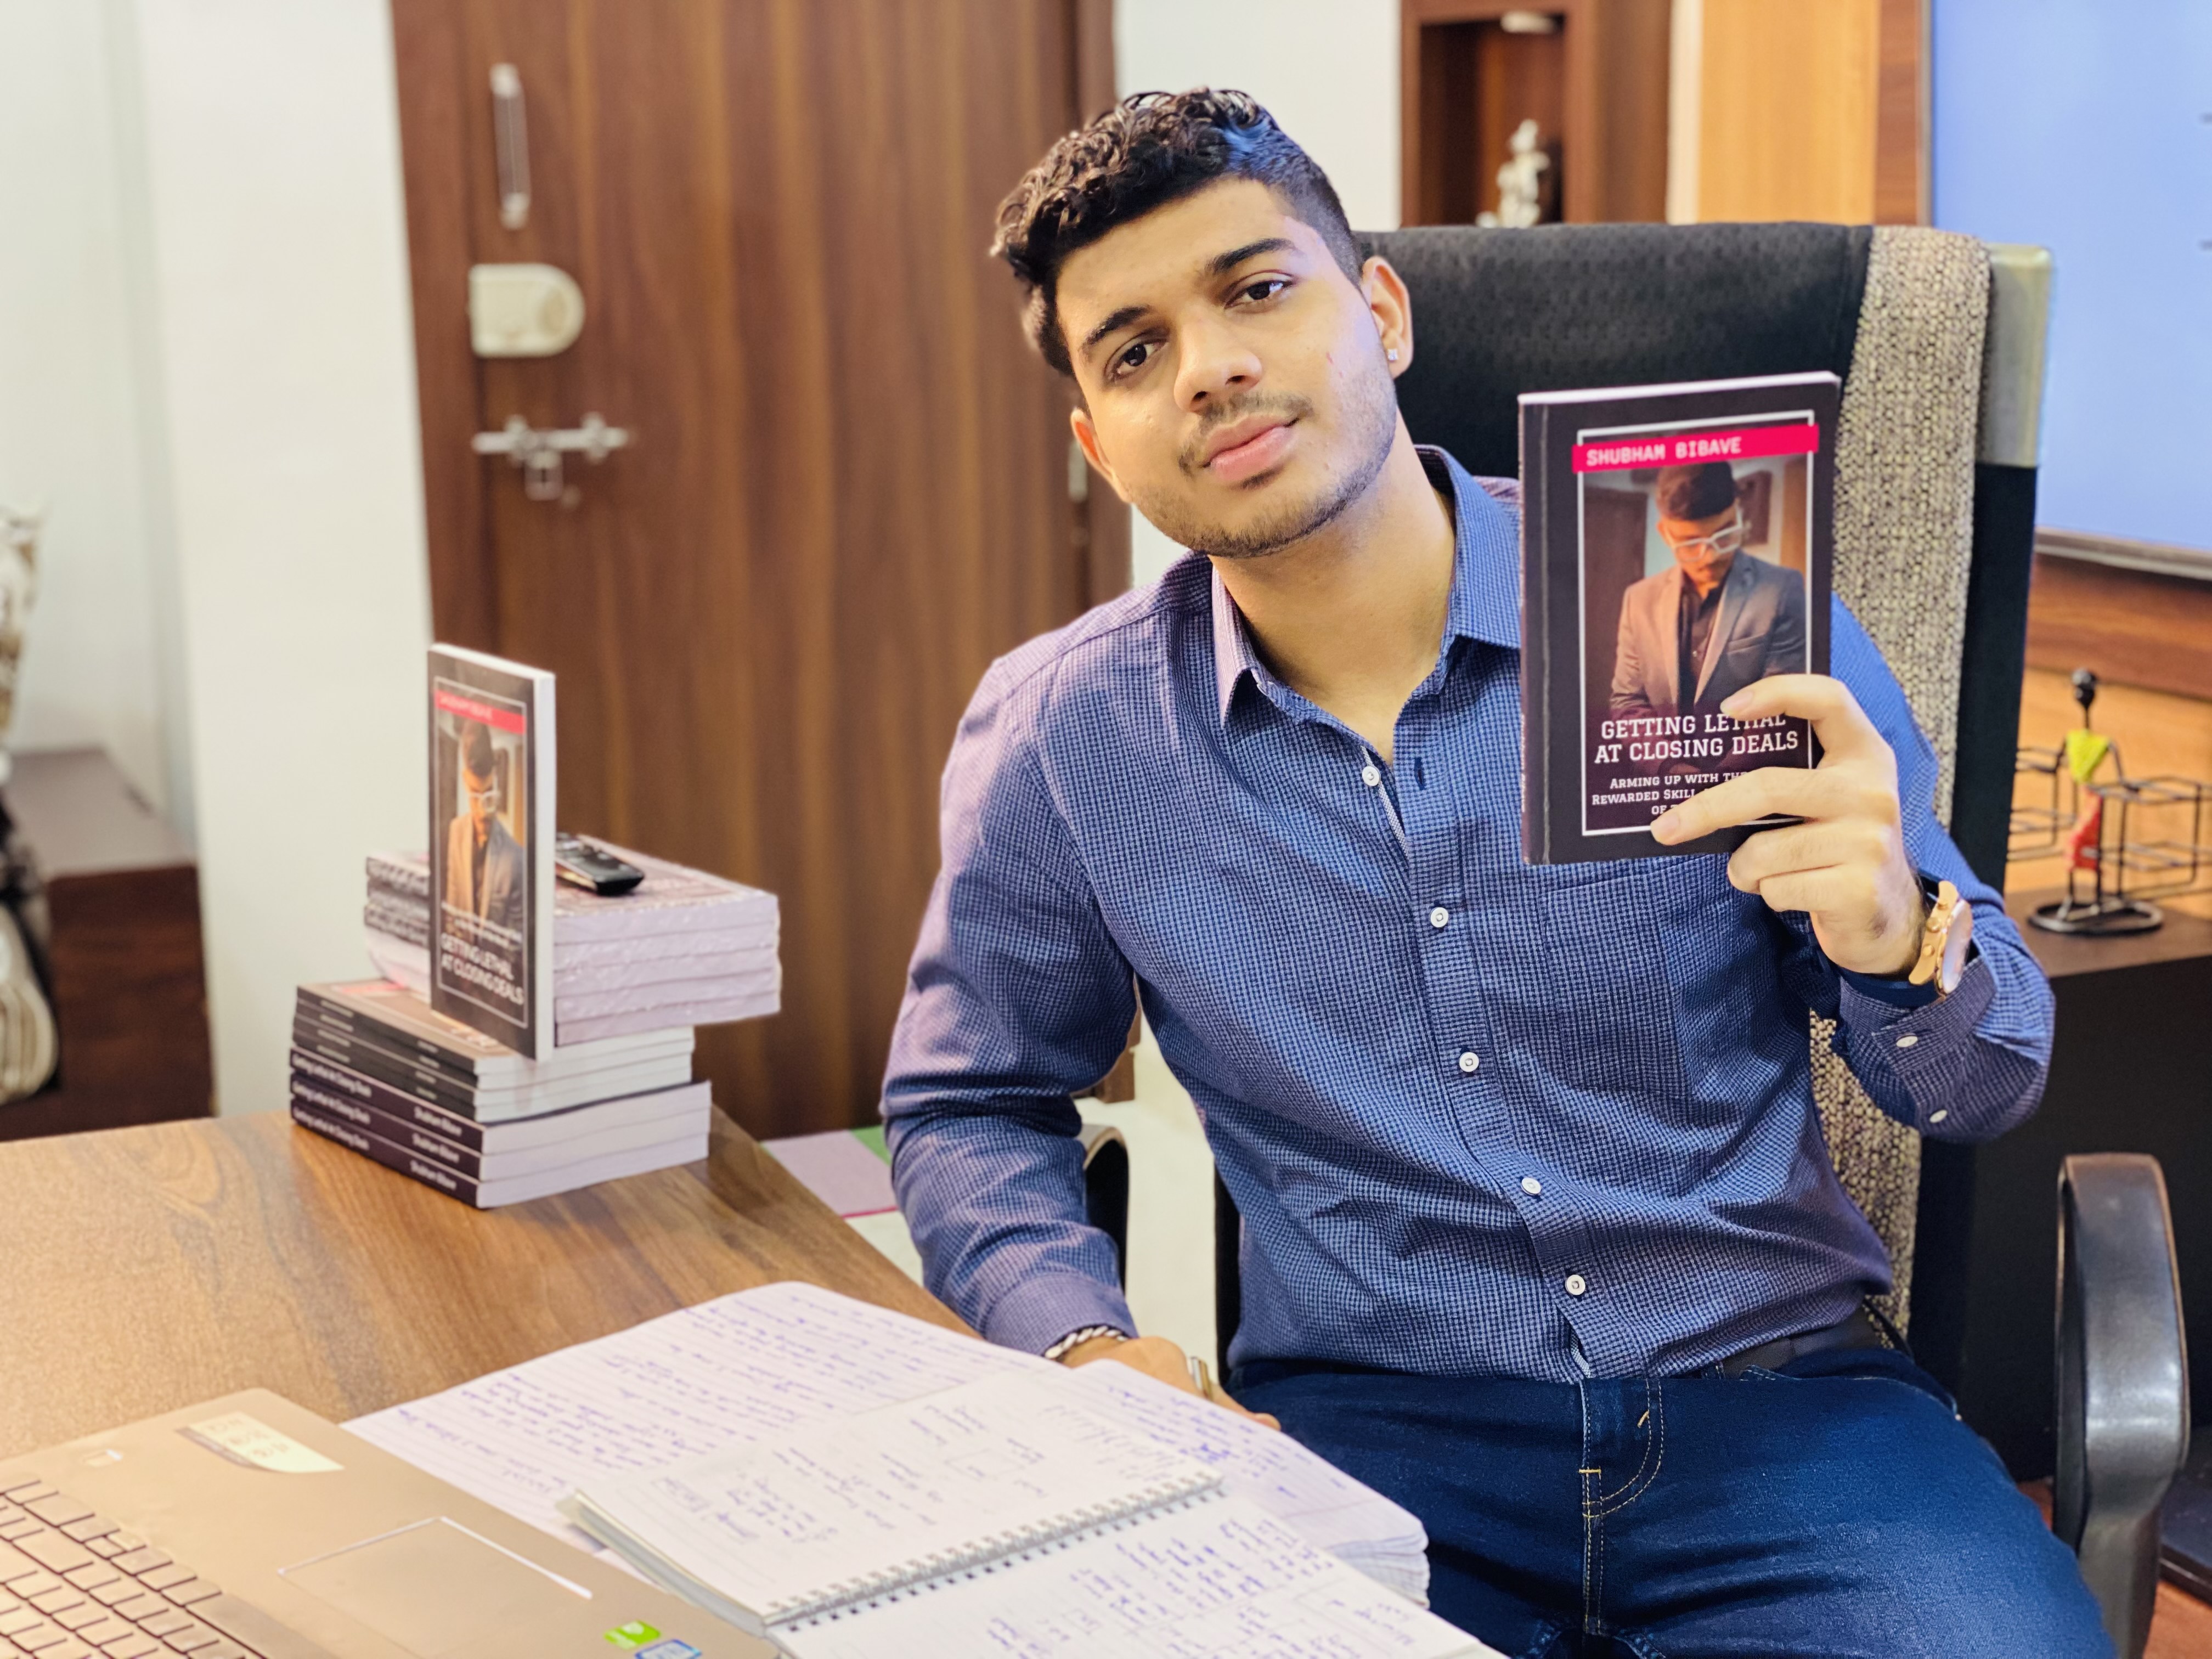 Shubham Bibave with his book 'Getting Lethal At Closing Deals'.